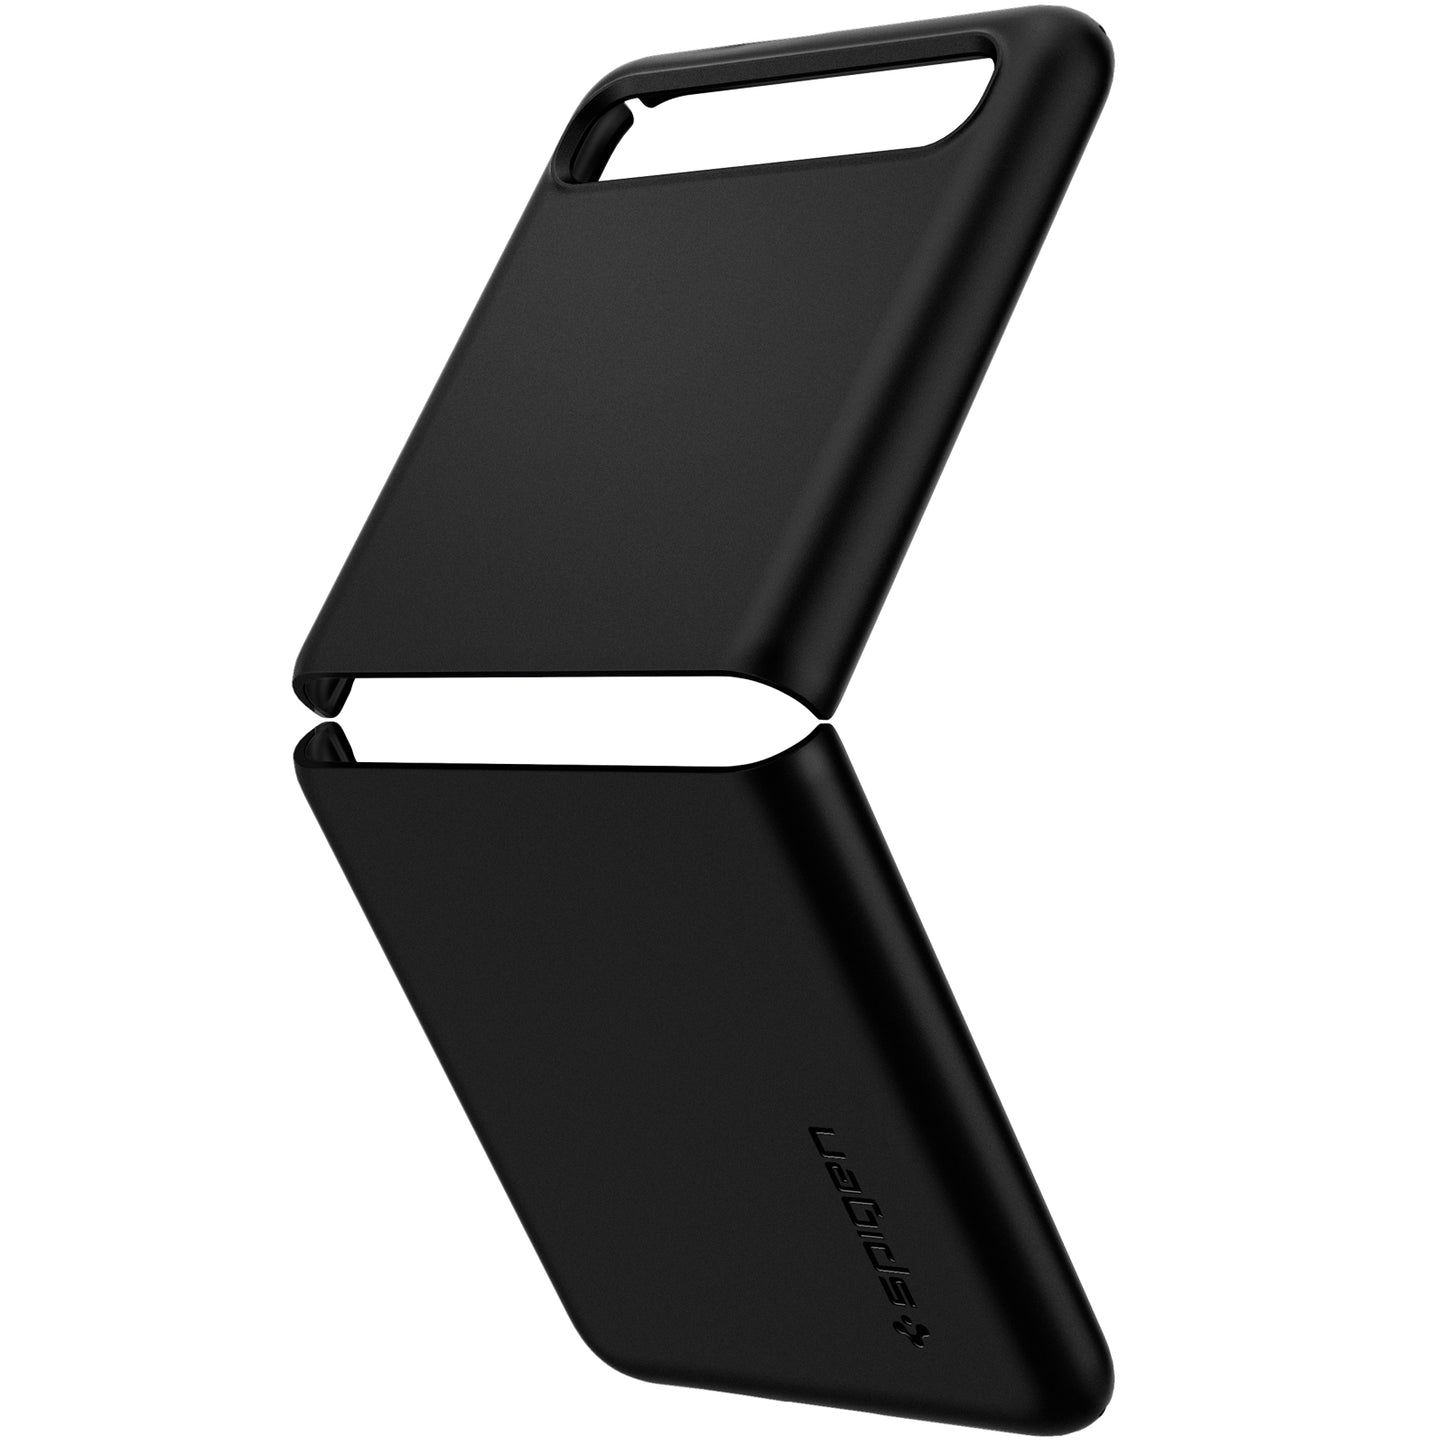 ACS01033 - Galaxy Z Flip Case Thin Fit in black showing the back and side